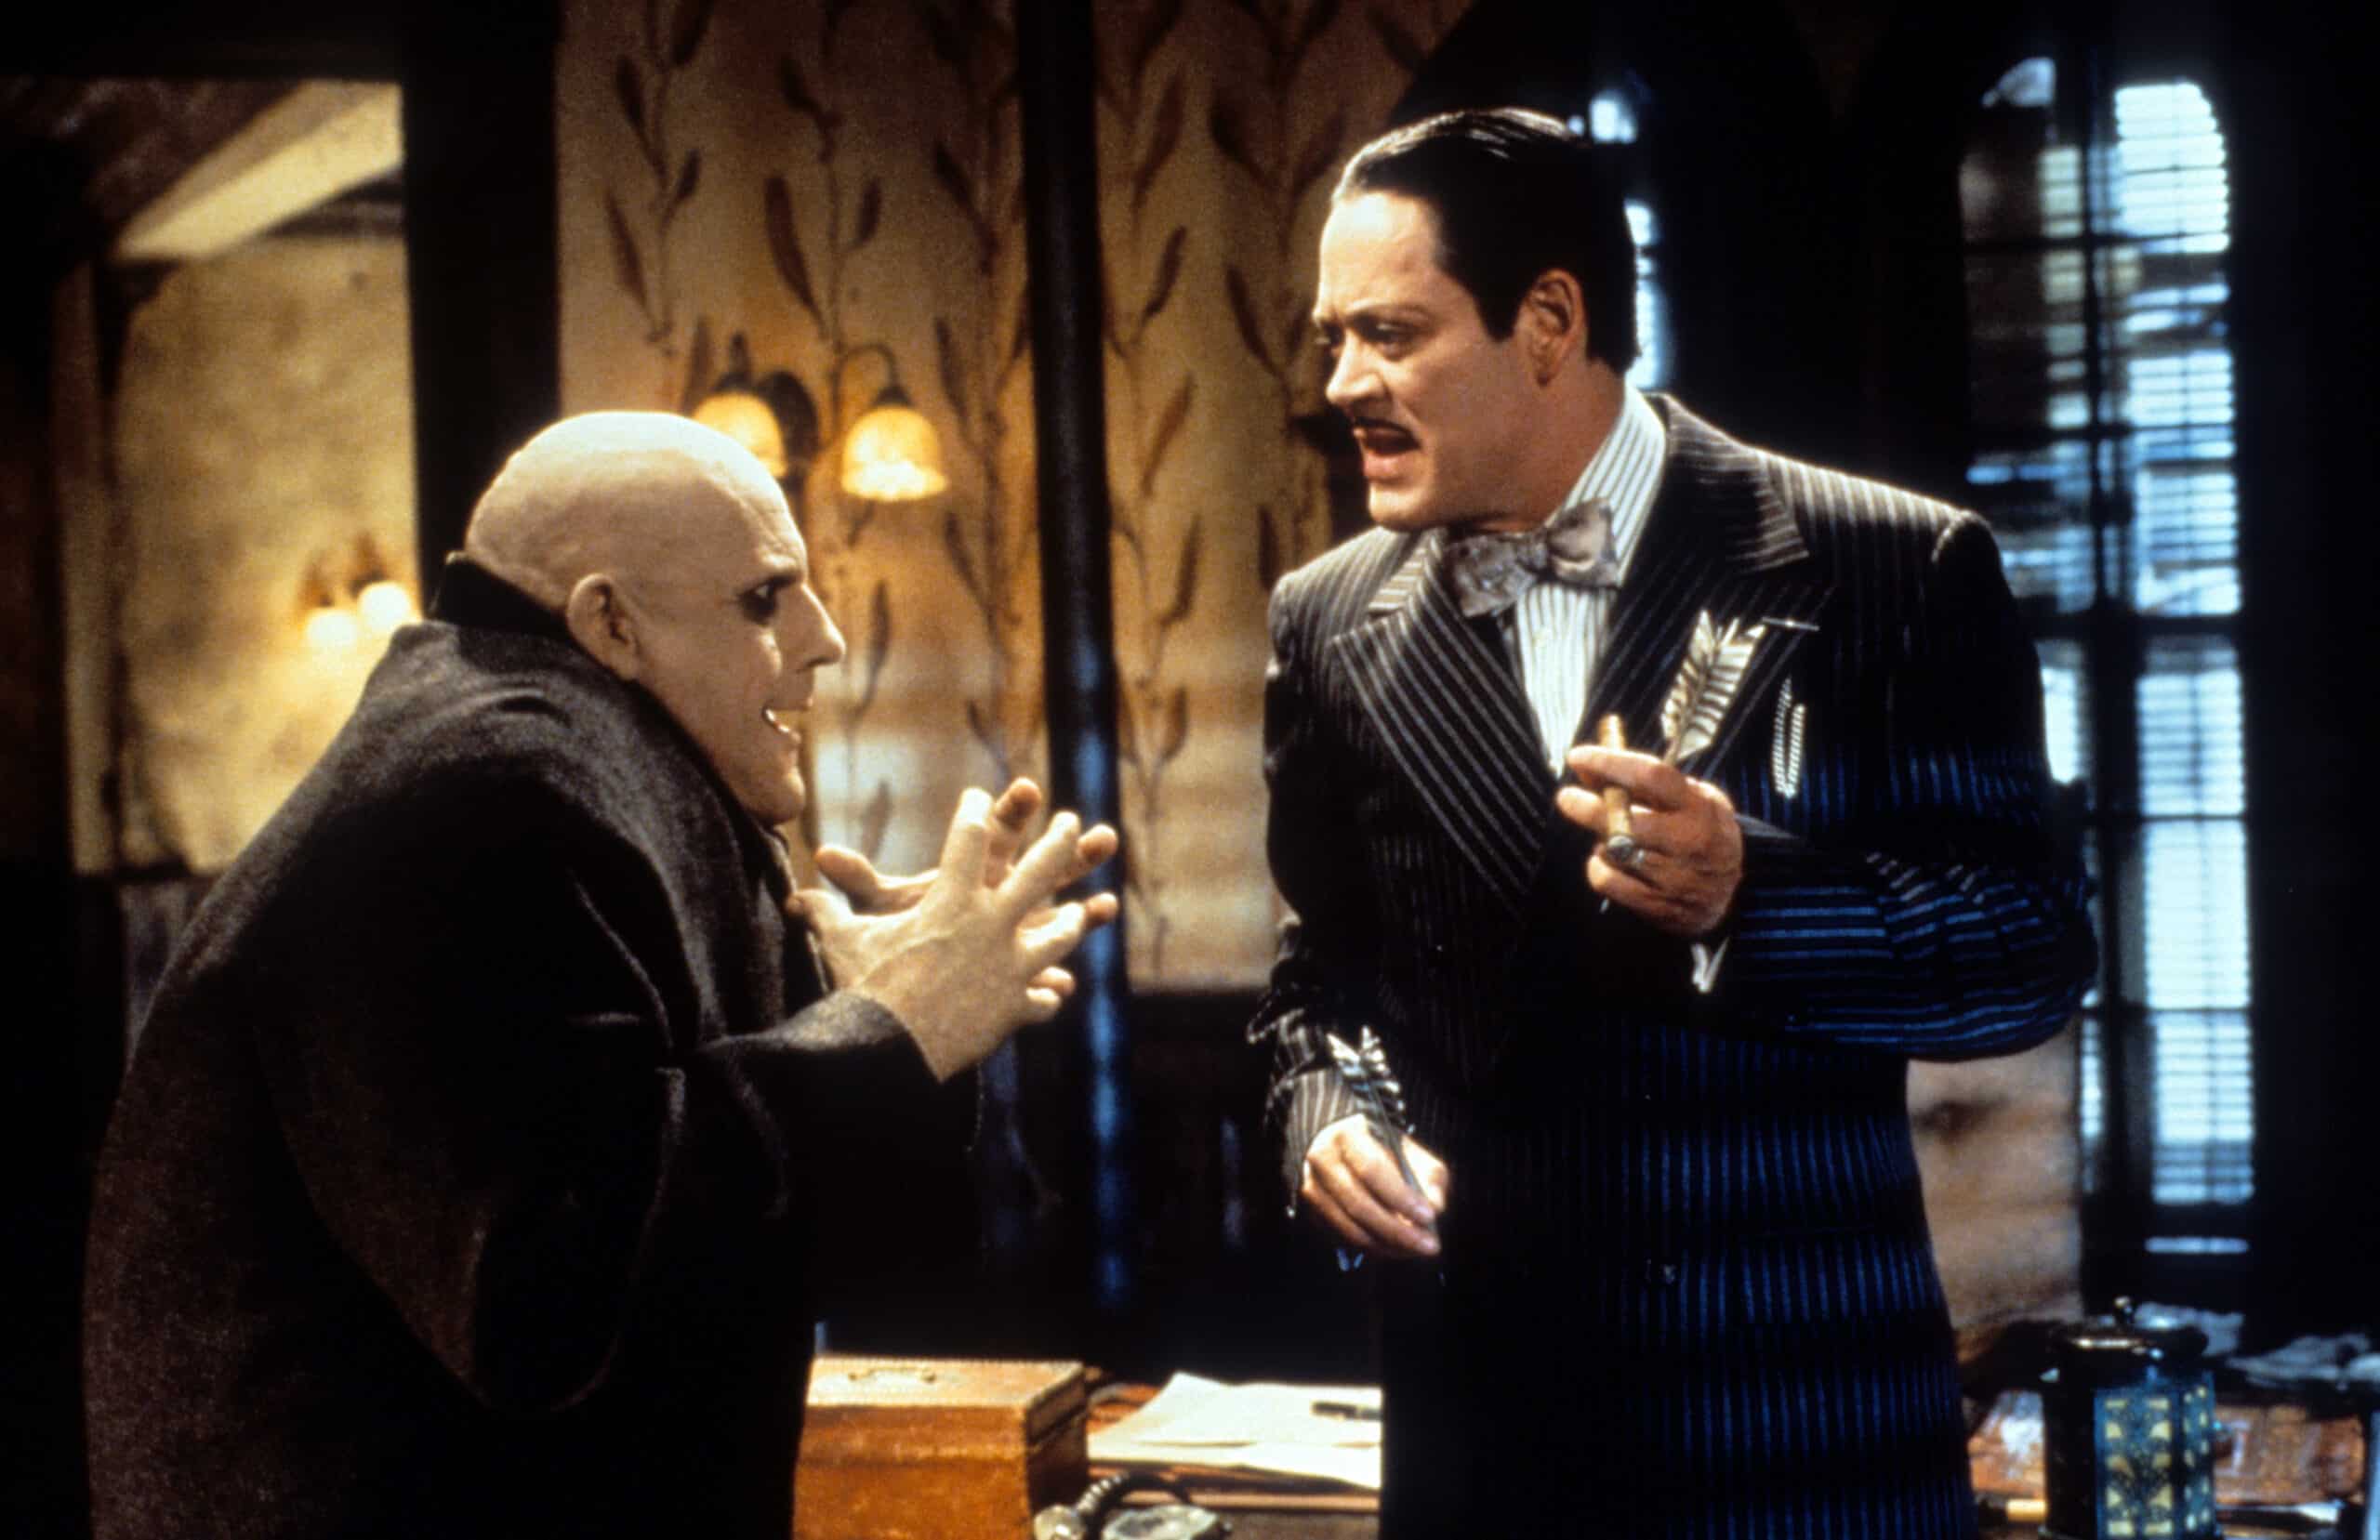 Christopher Lloyd And Raul Julia In 'Addams Family Values'